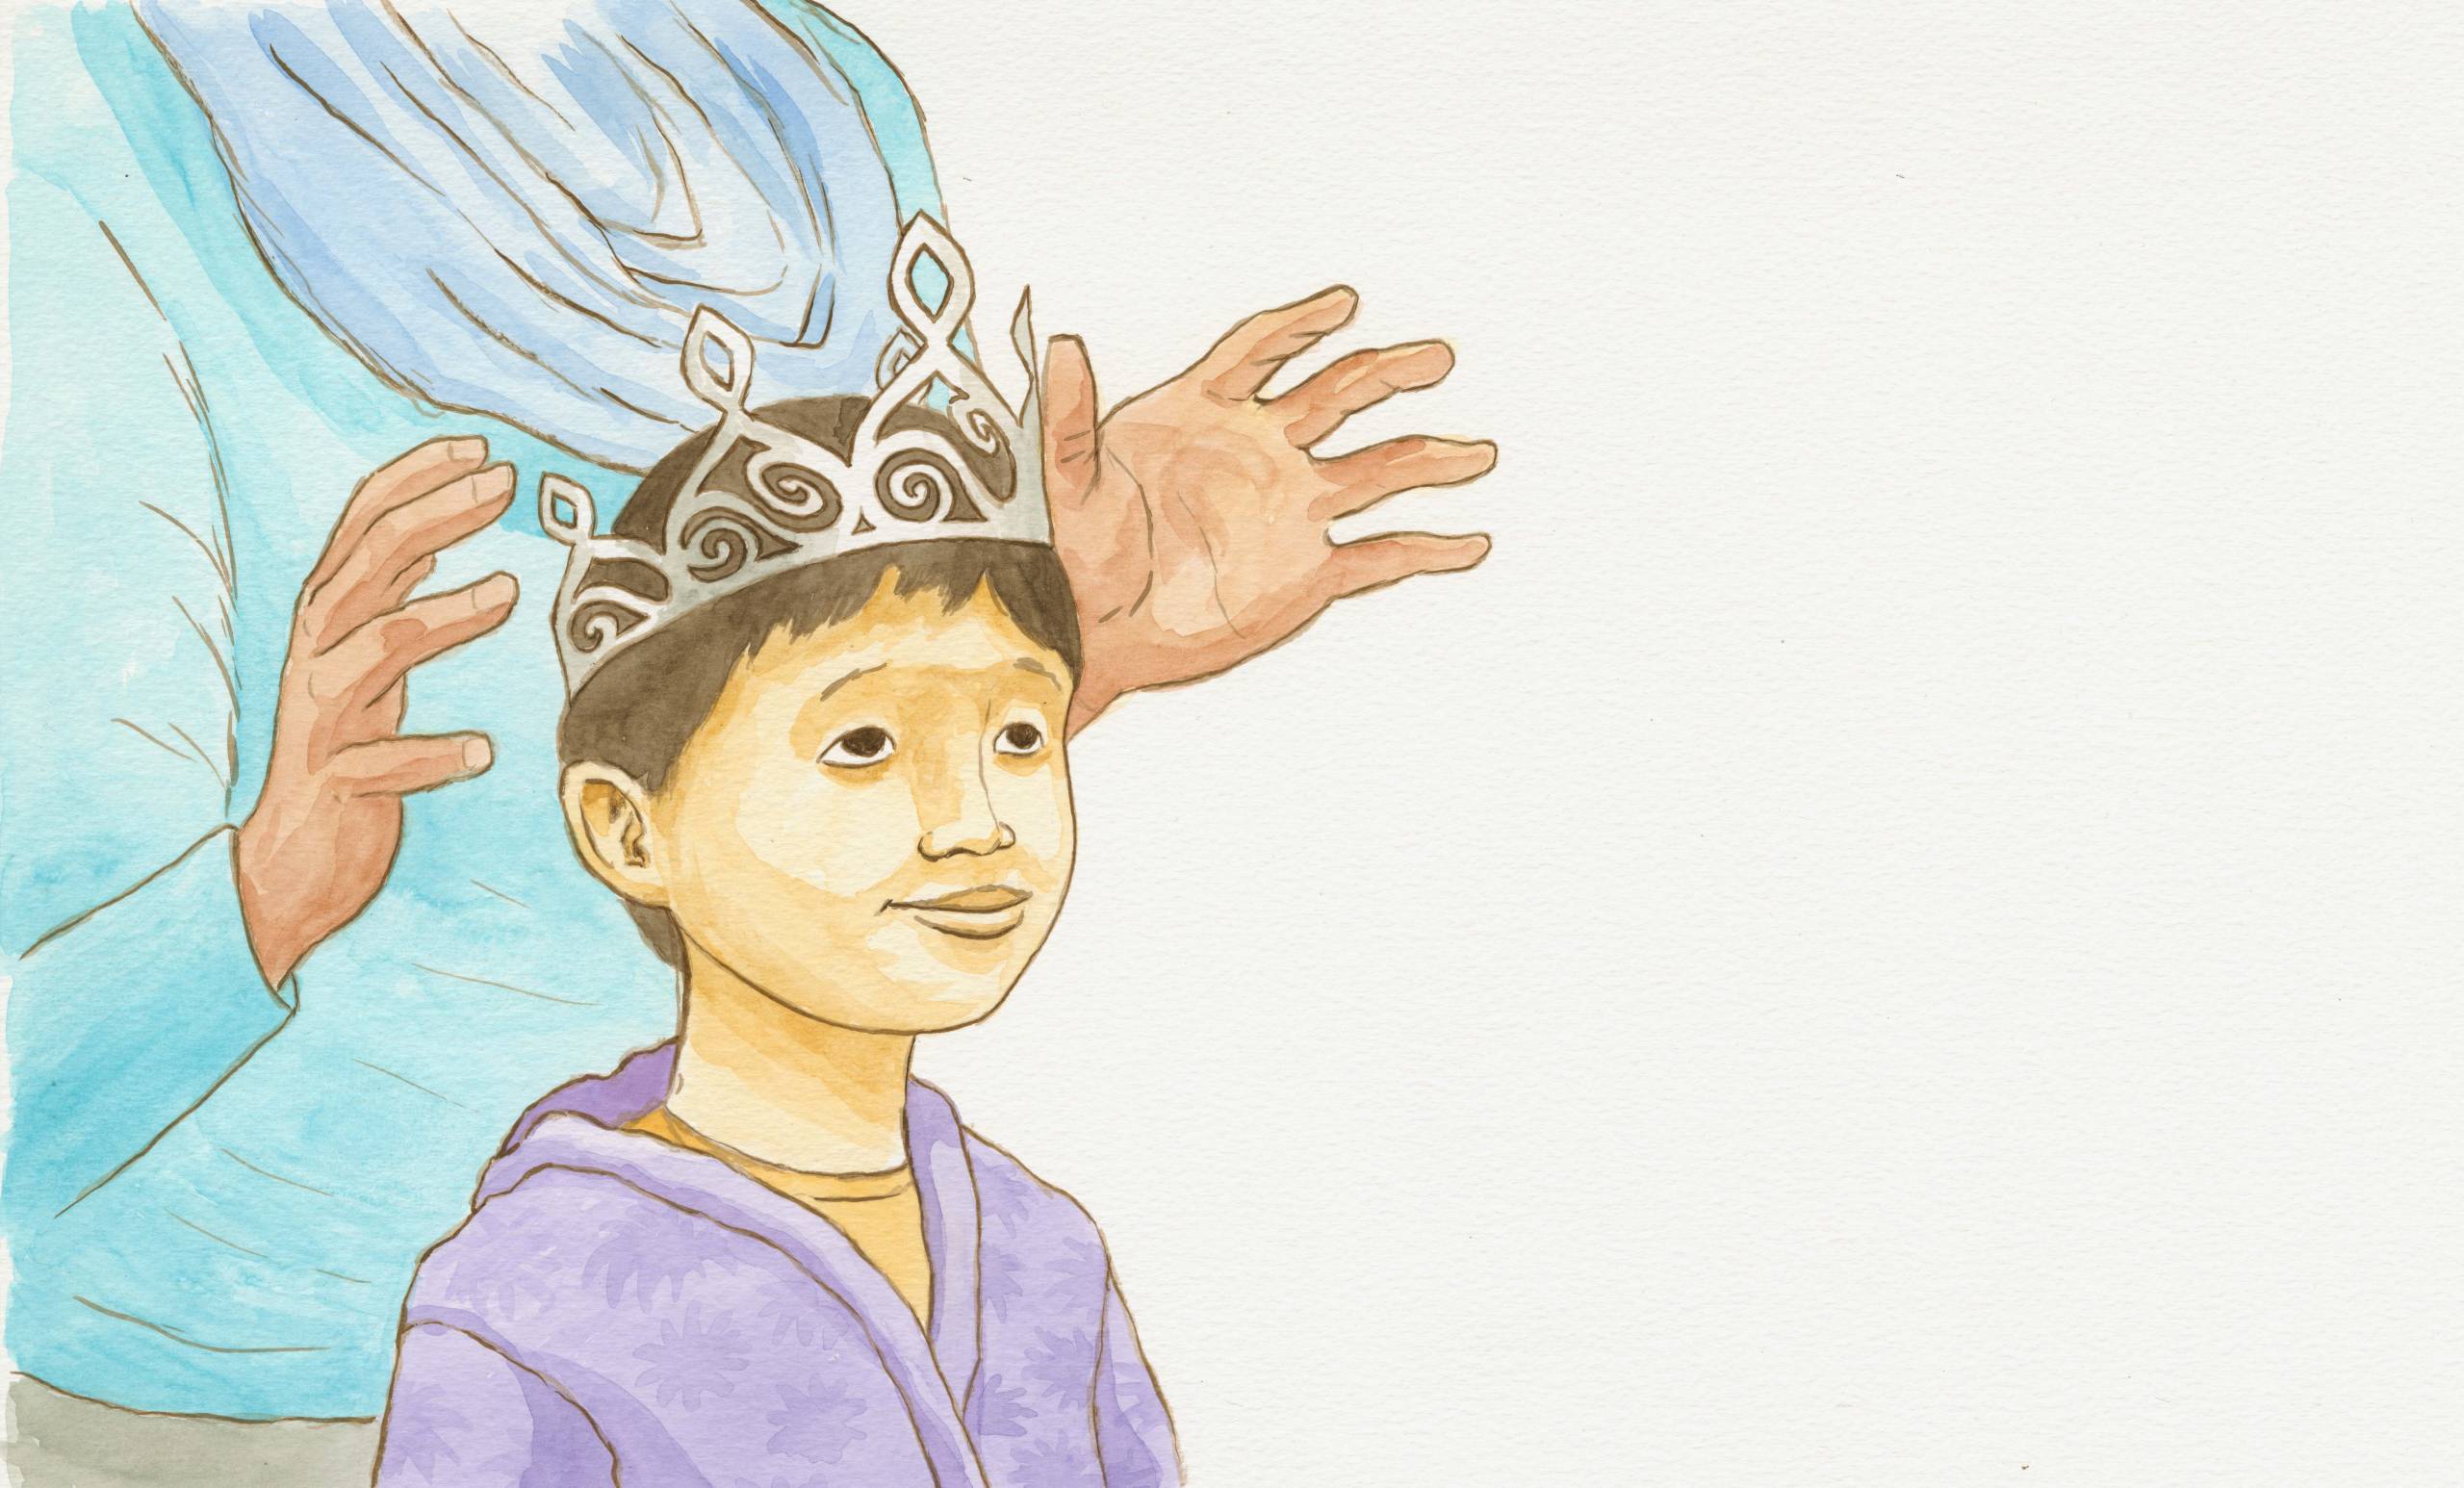 A pair of hands place a princess crown on a young boy.